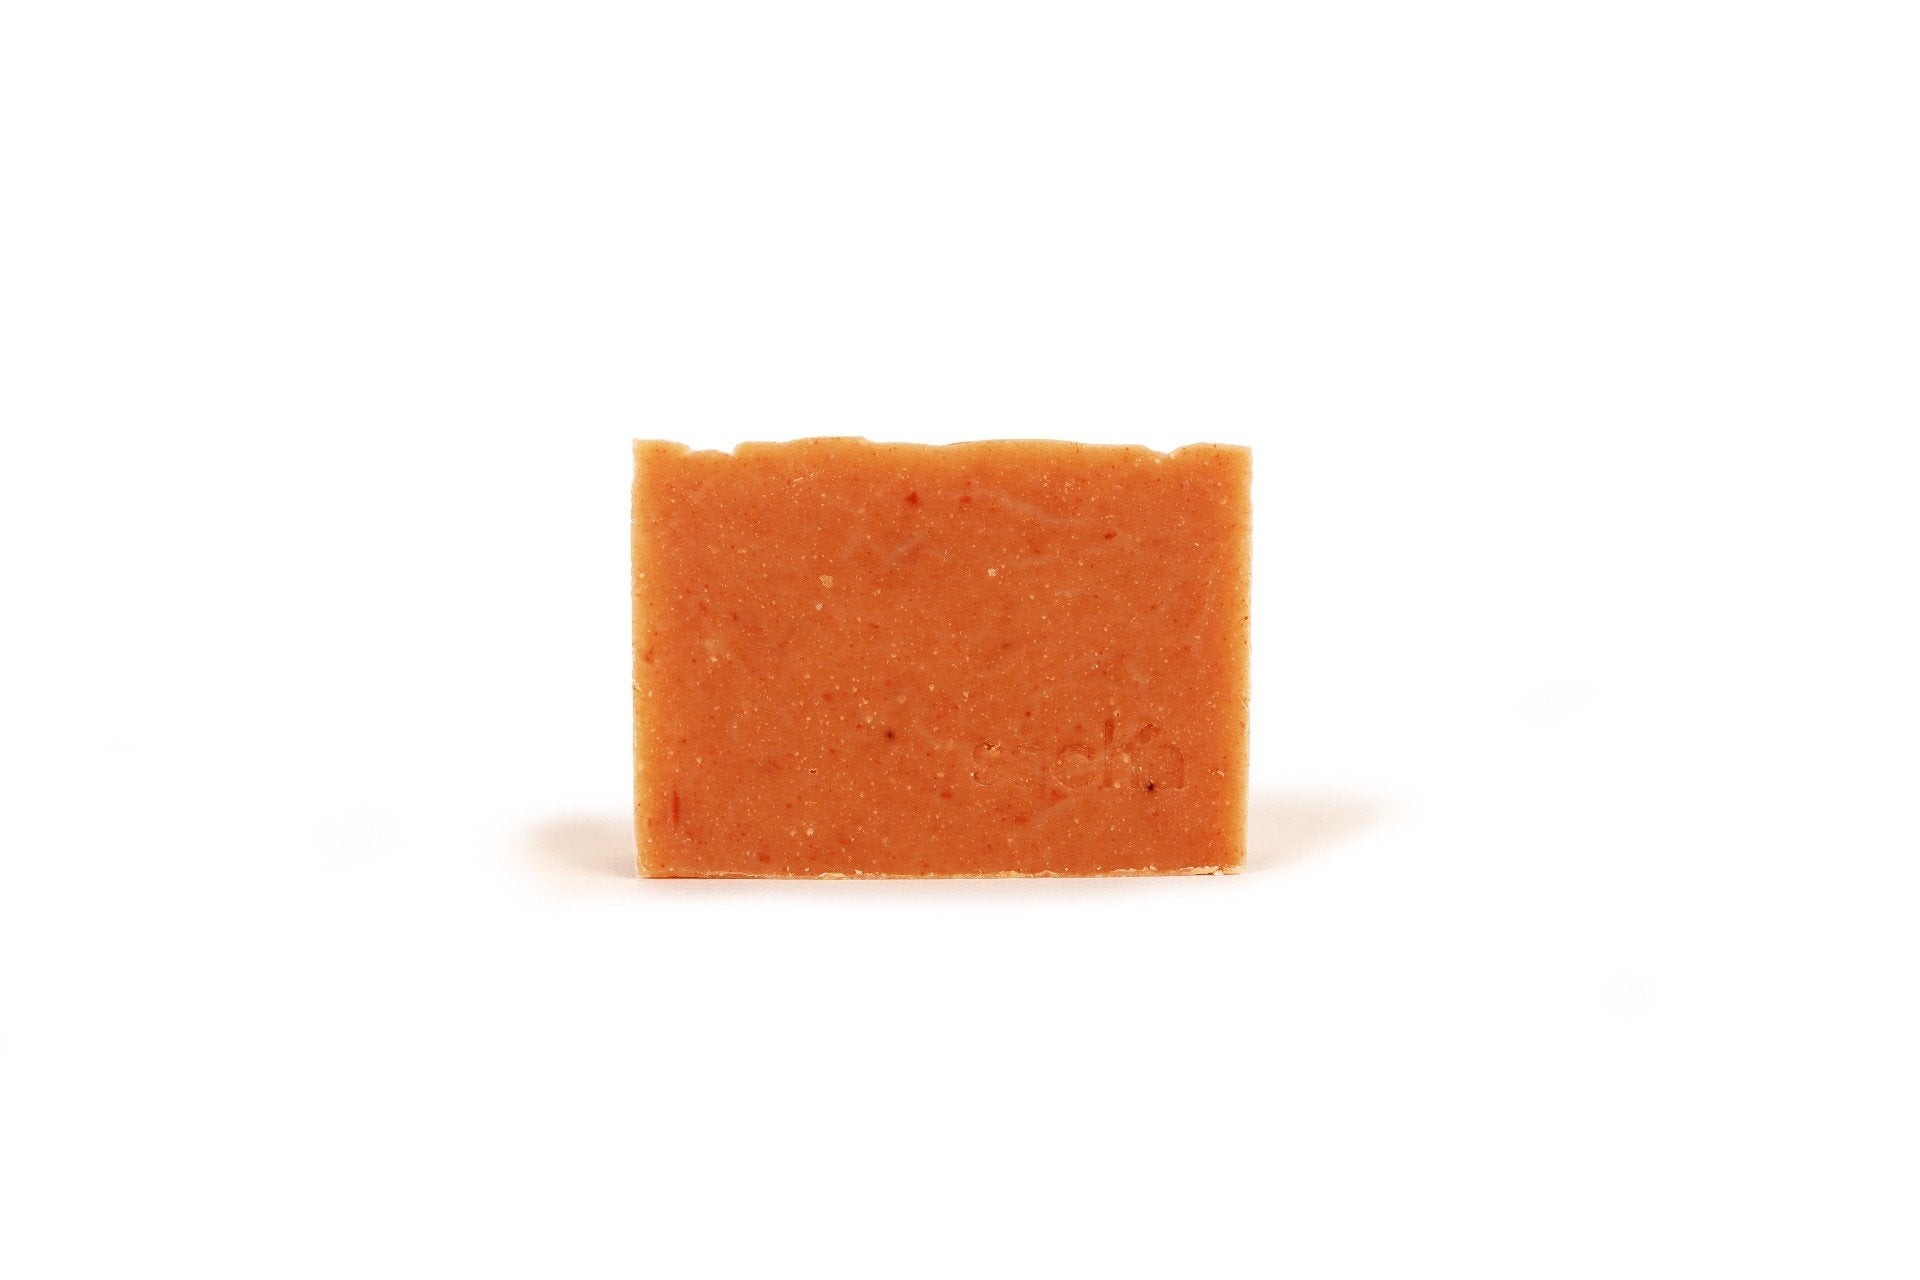 Sacha Botanicals Hippie Body Soap | Buy at The Green Collective